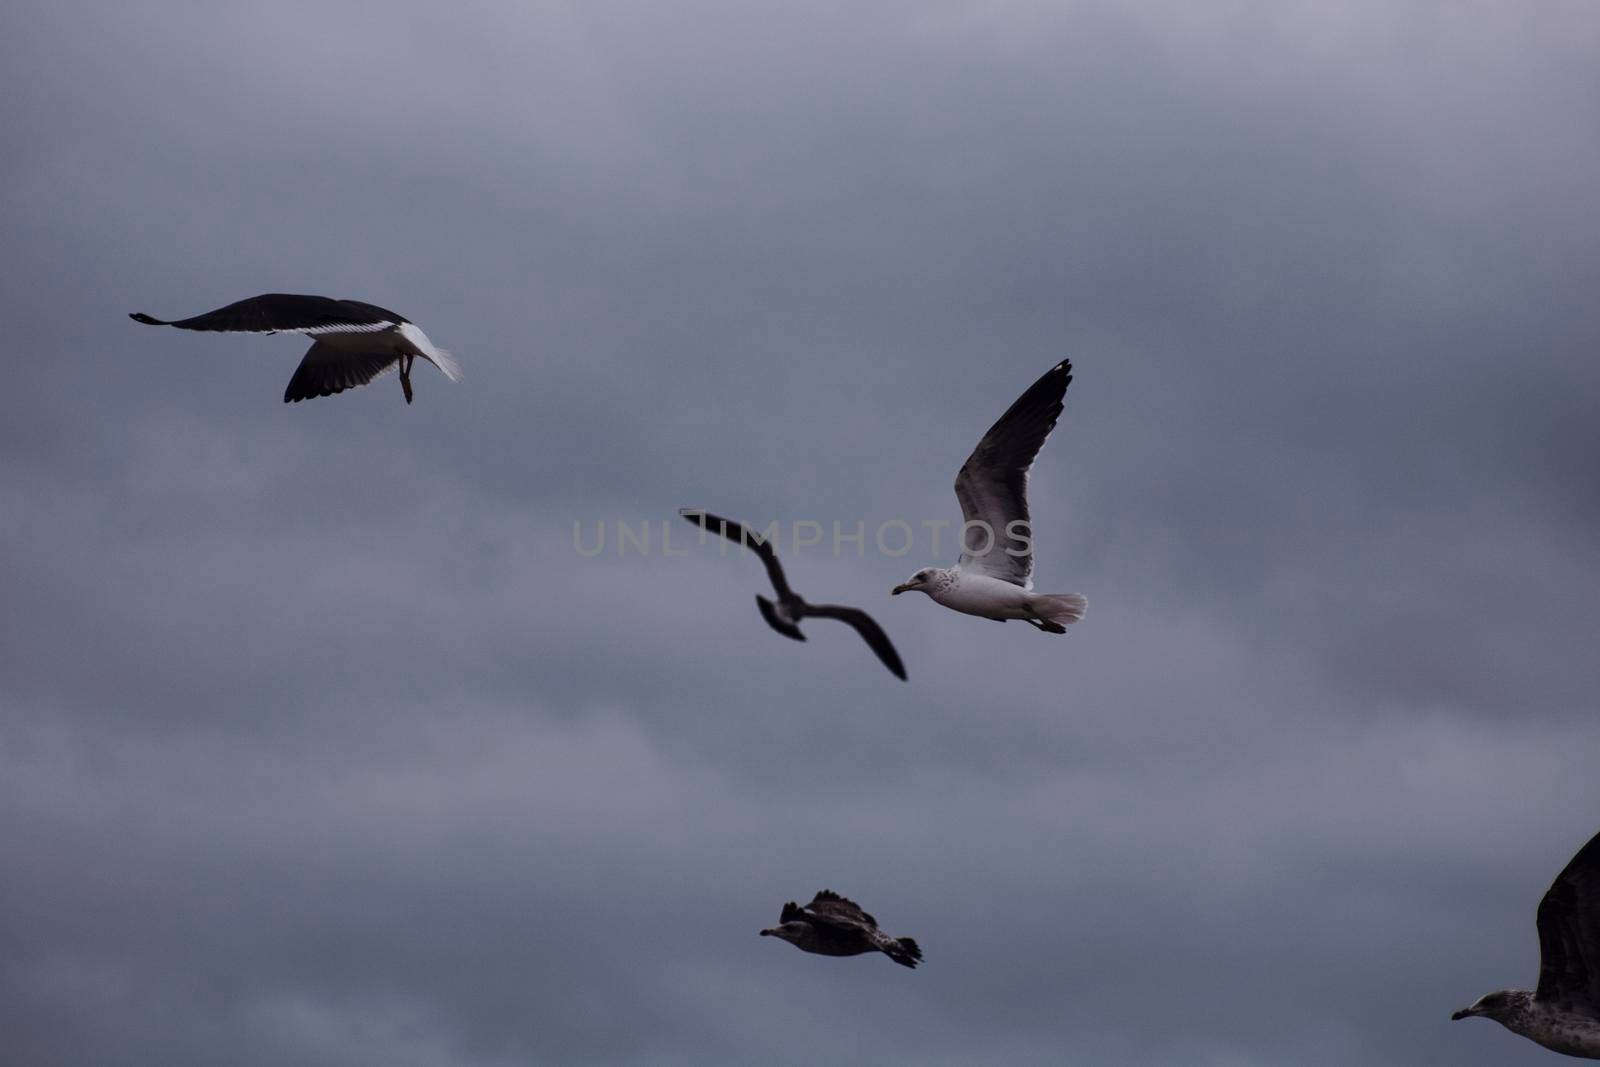 Some seagulls flying in the cloudy sky